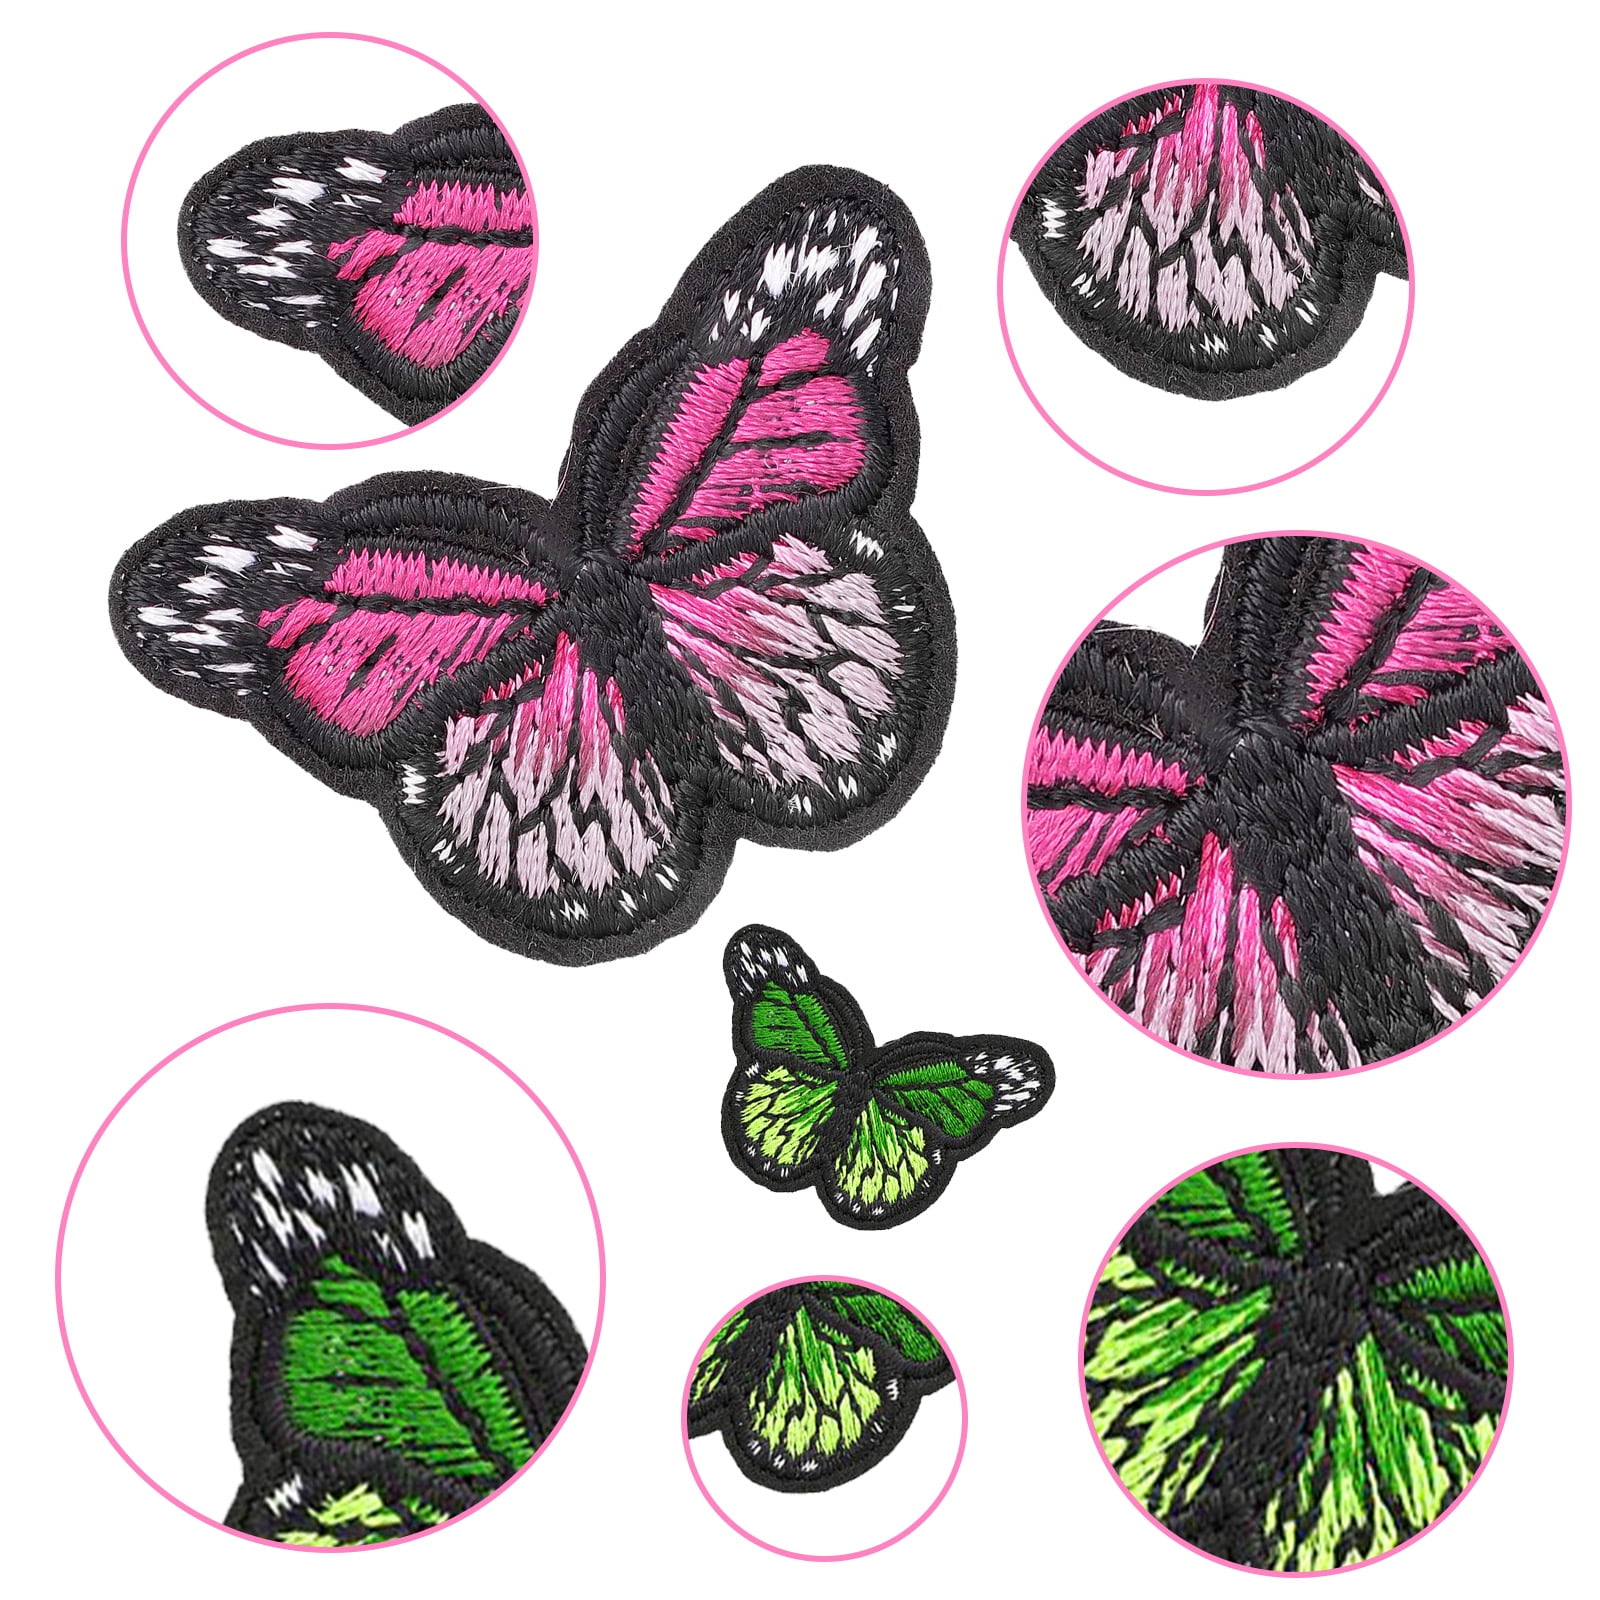 1pcs Cool Moths Embroidery Iron On Patches For Clothes Design DIY Accessory  Applique Stickers